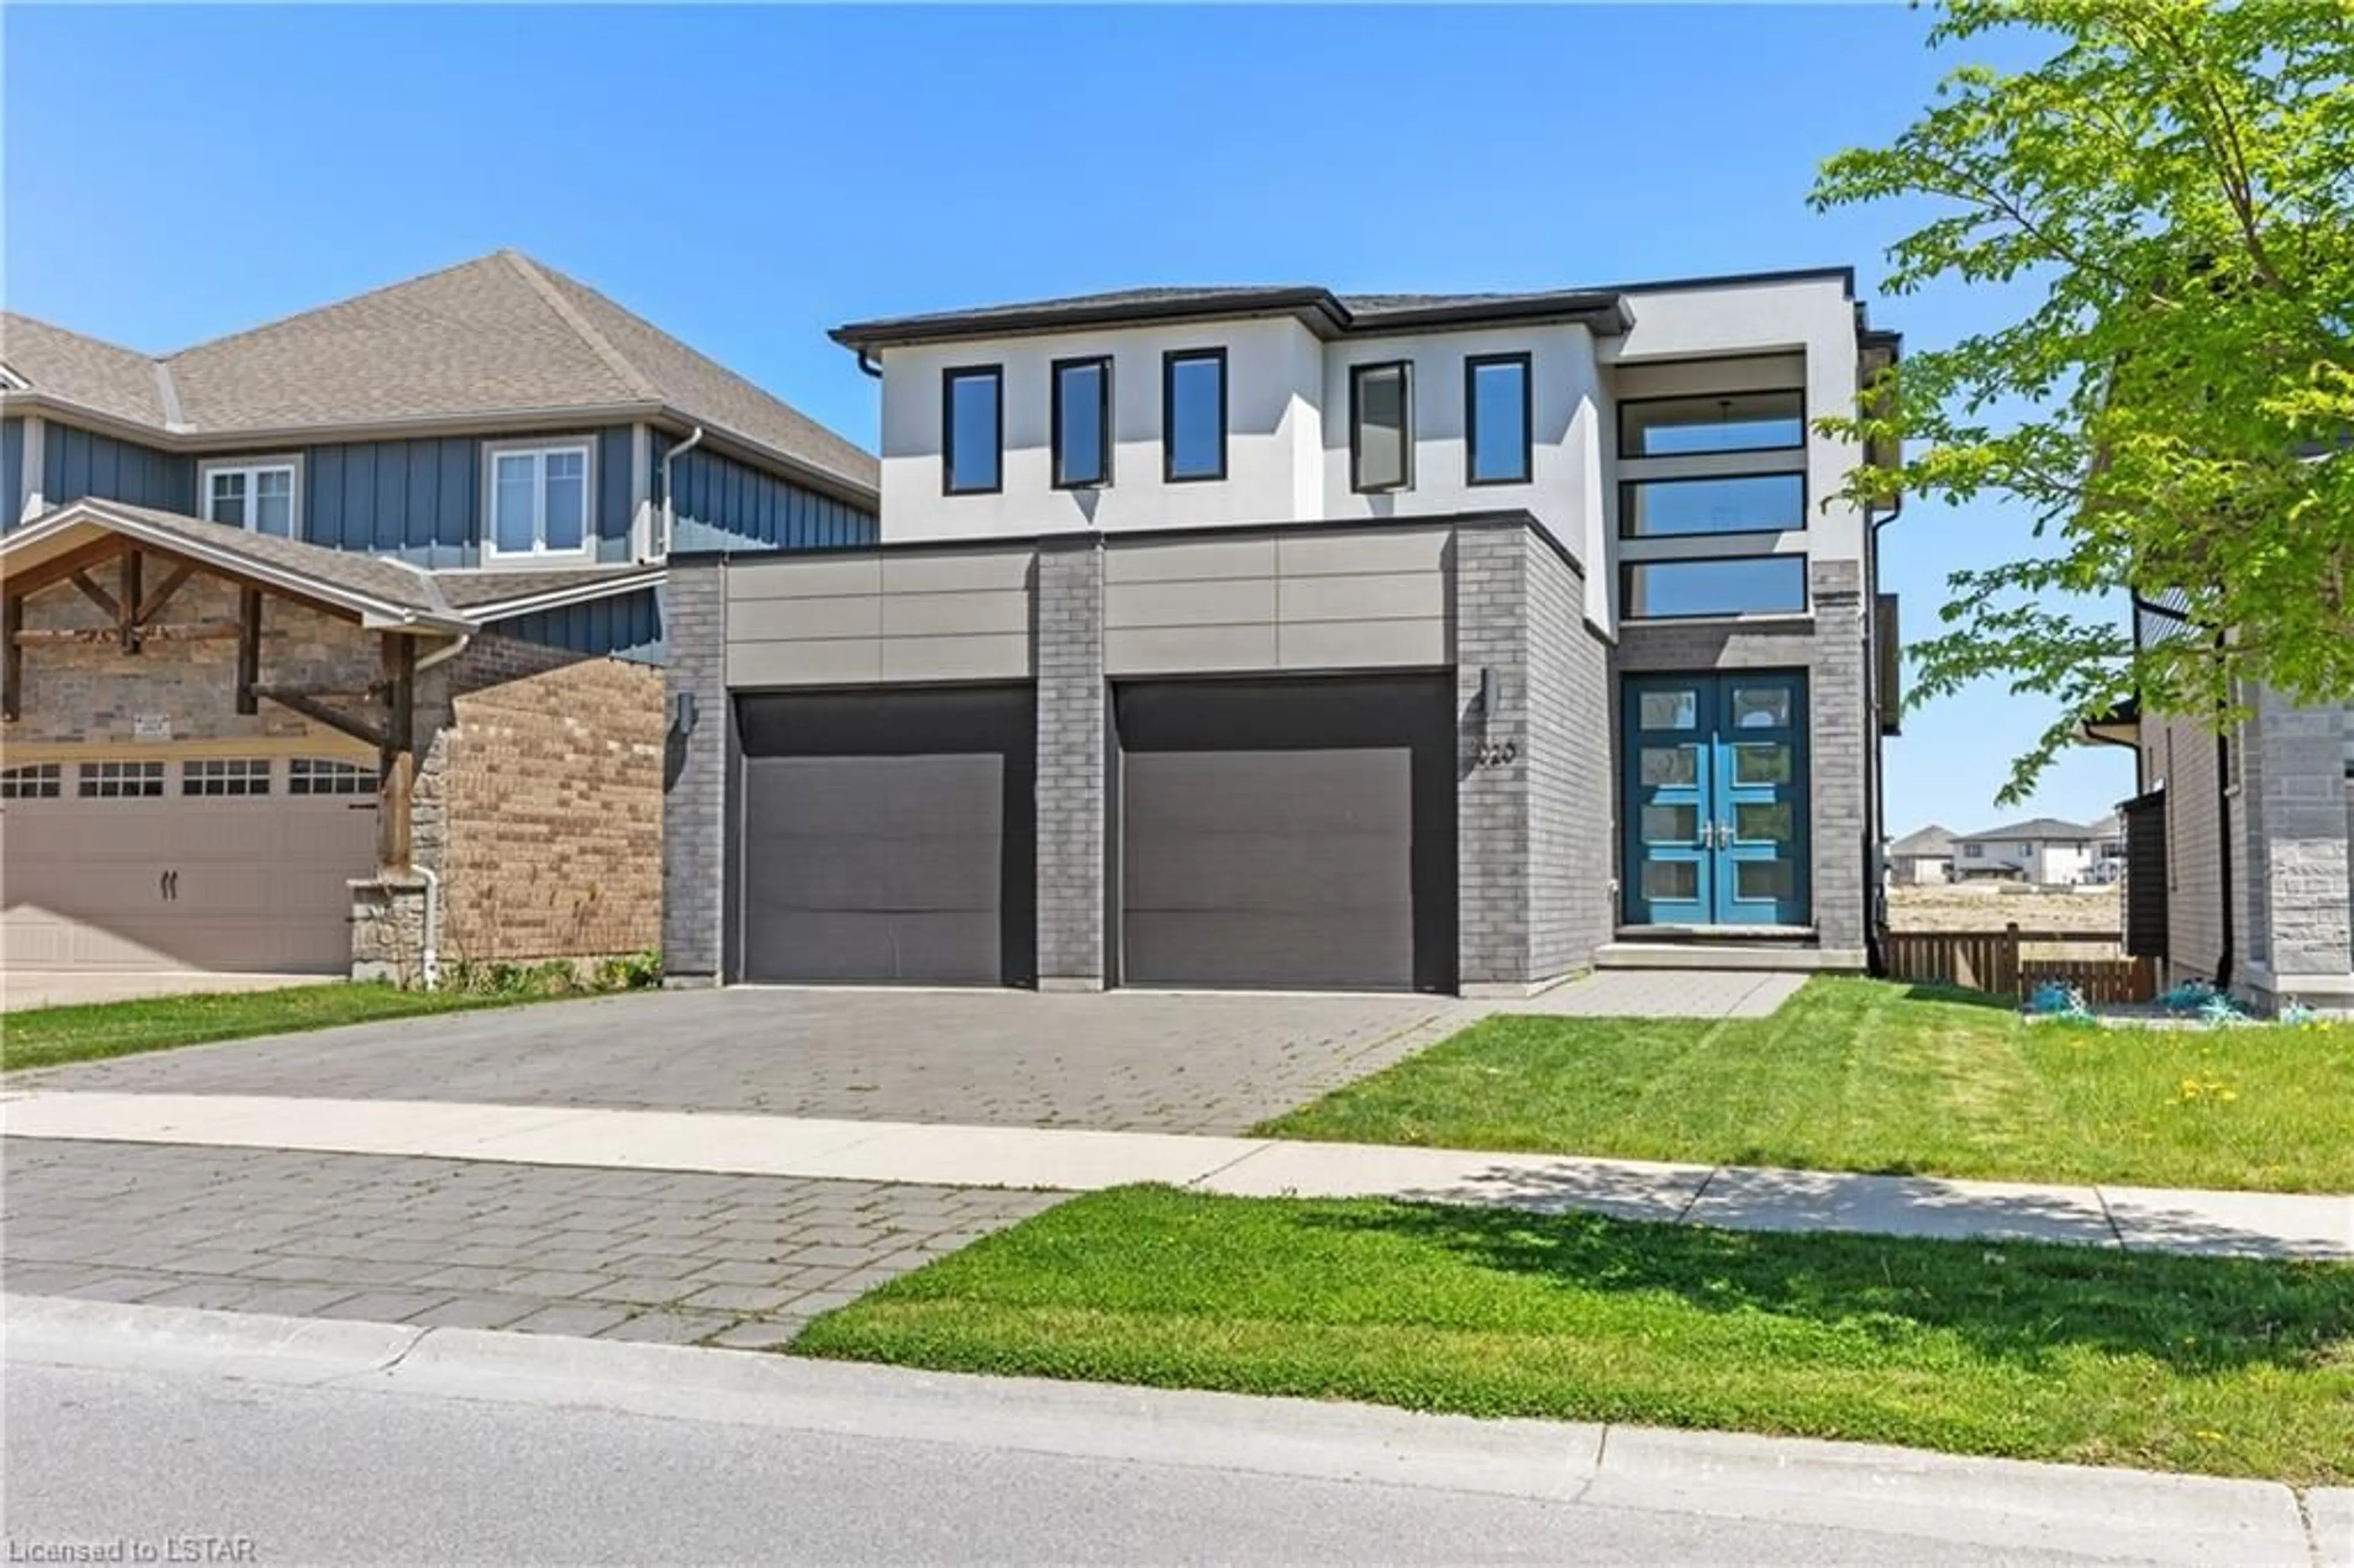 Frontside or backside of a home for 2020 Wateroak Dr, London Ontario N6G 0M6